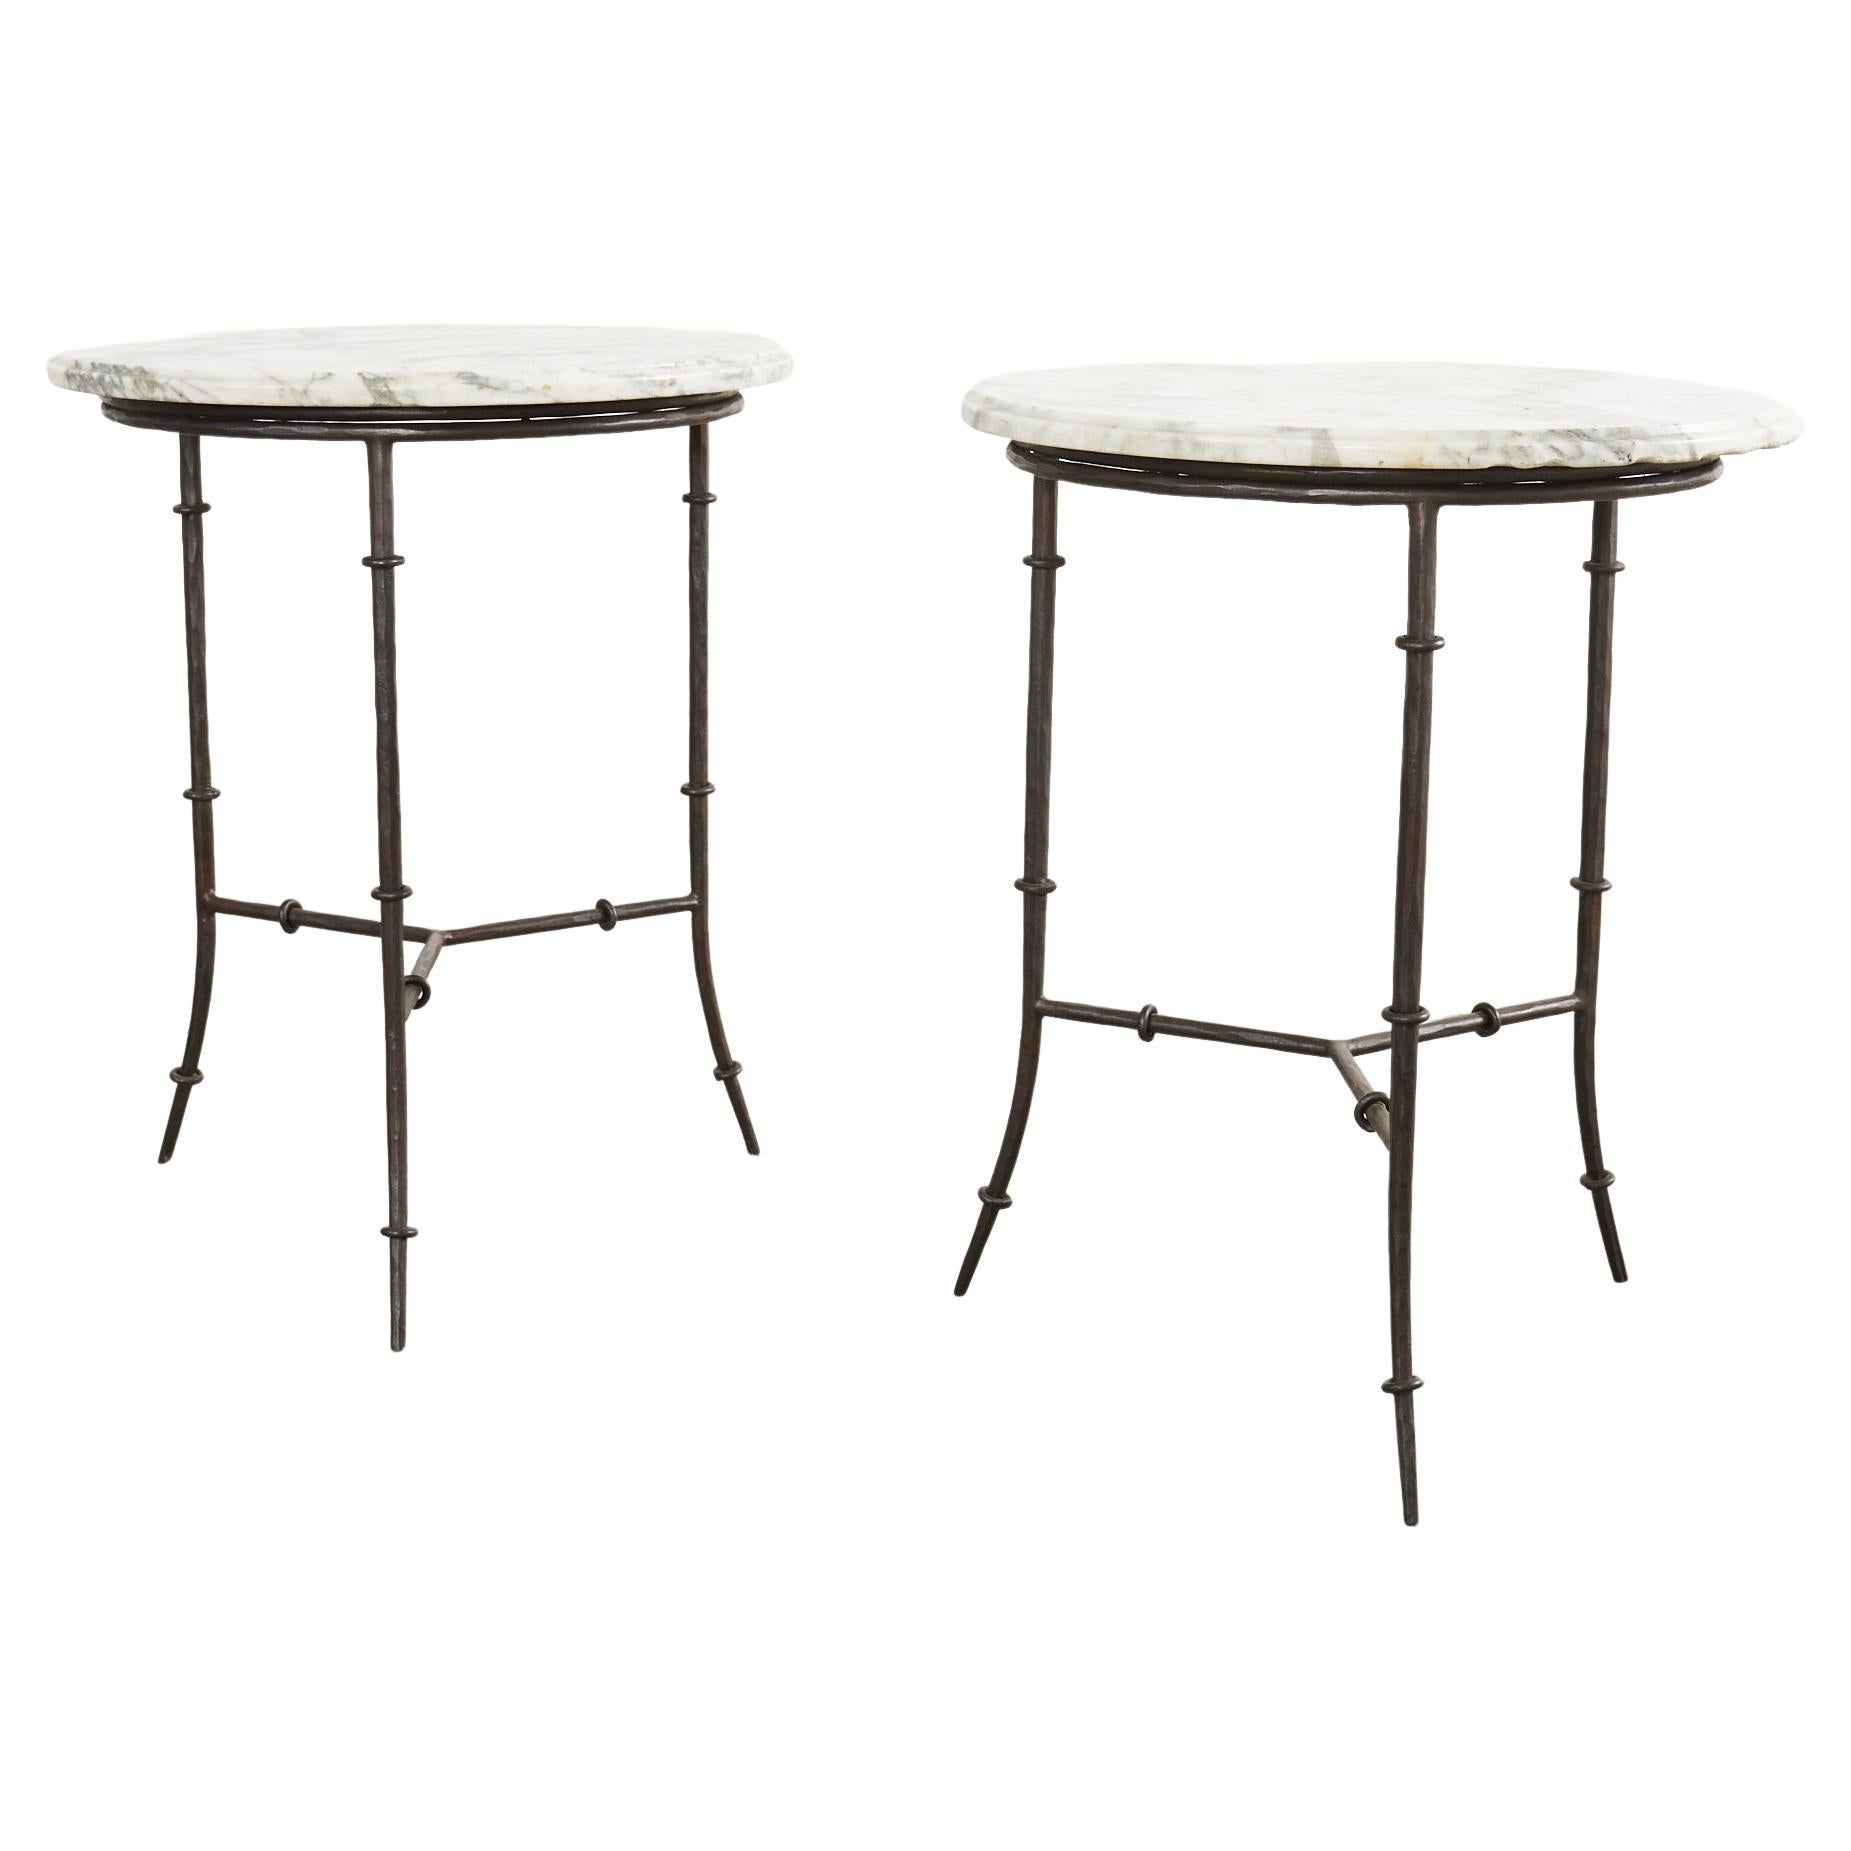 Pair of Italian Faux Bamboo Iron and Marble Drink Tables